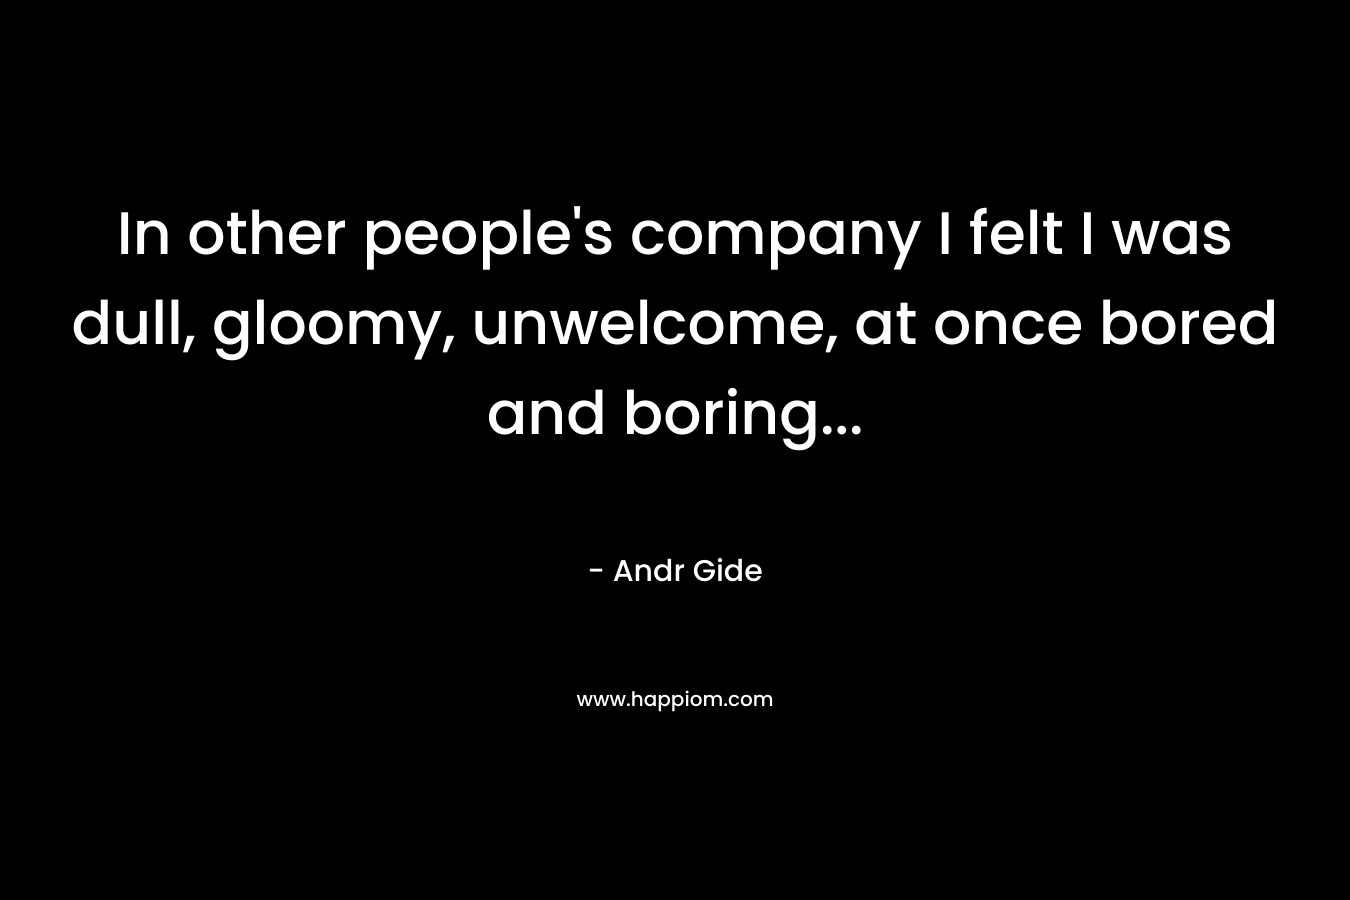 In other people's company I felt I was dull, gloomy, unwelcome, at once bored and boring...